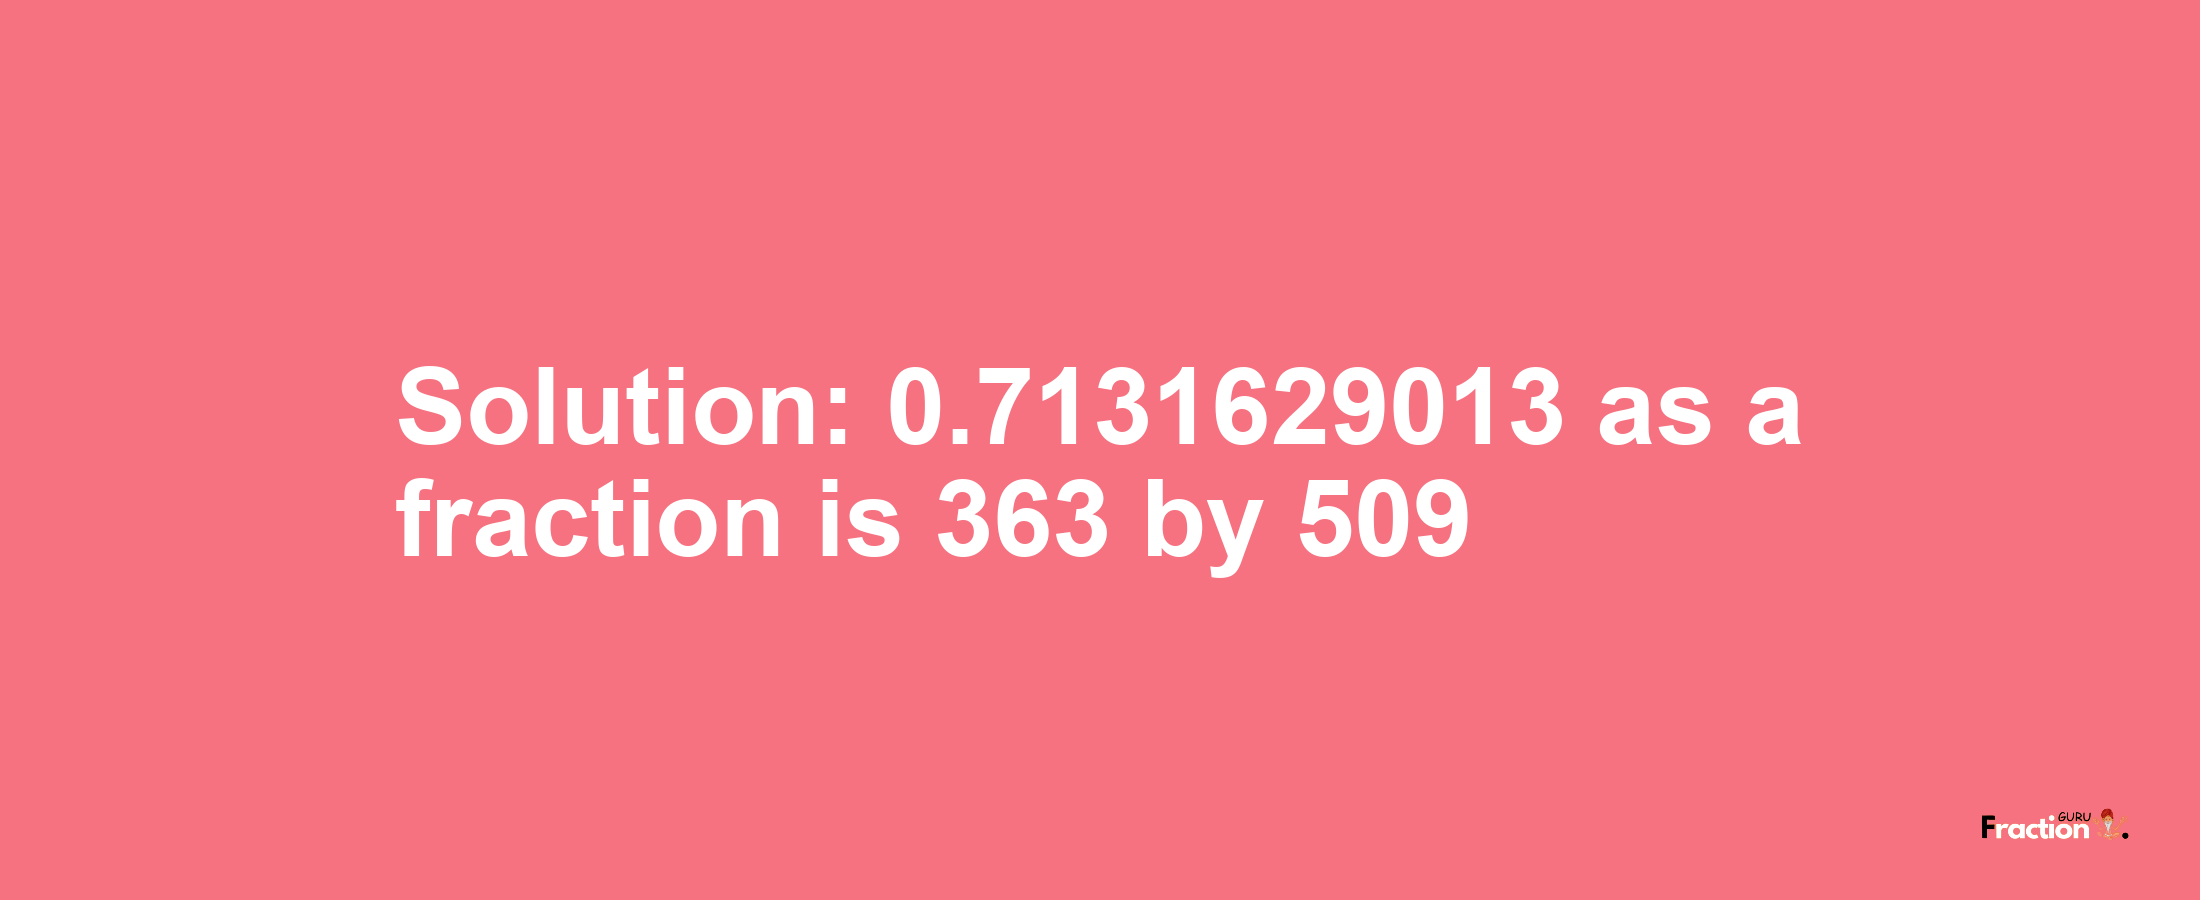 Solution:0.7131629013 as a fraction is 363/509